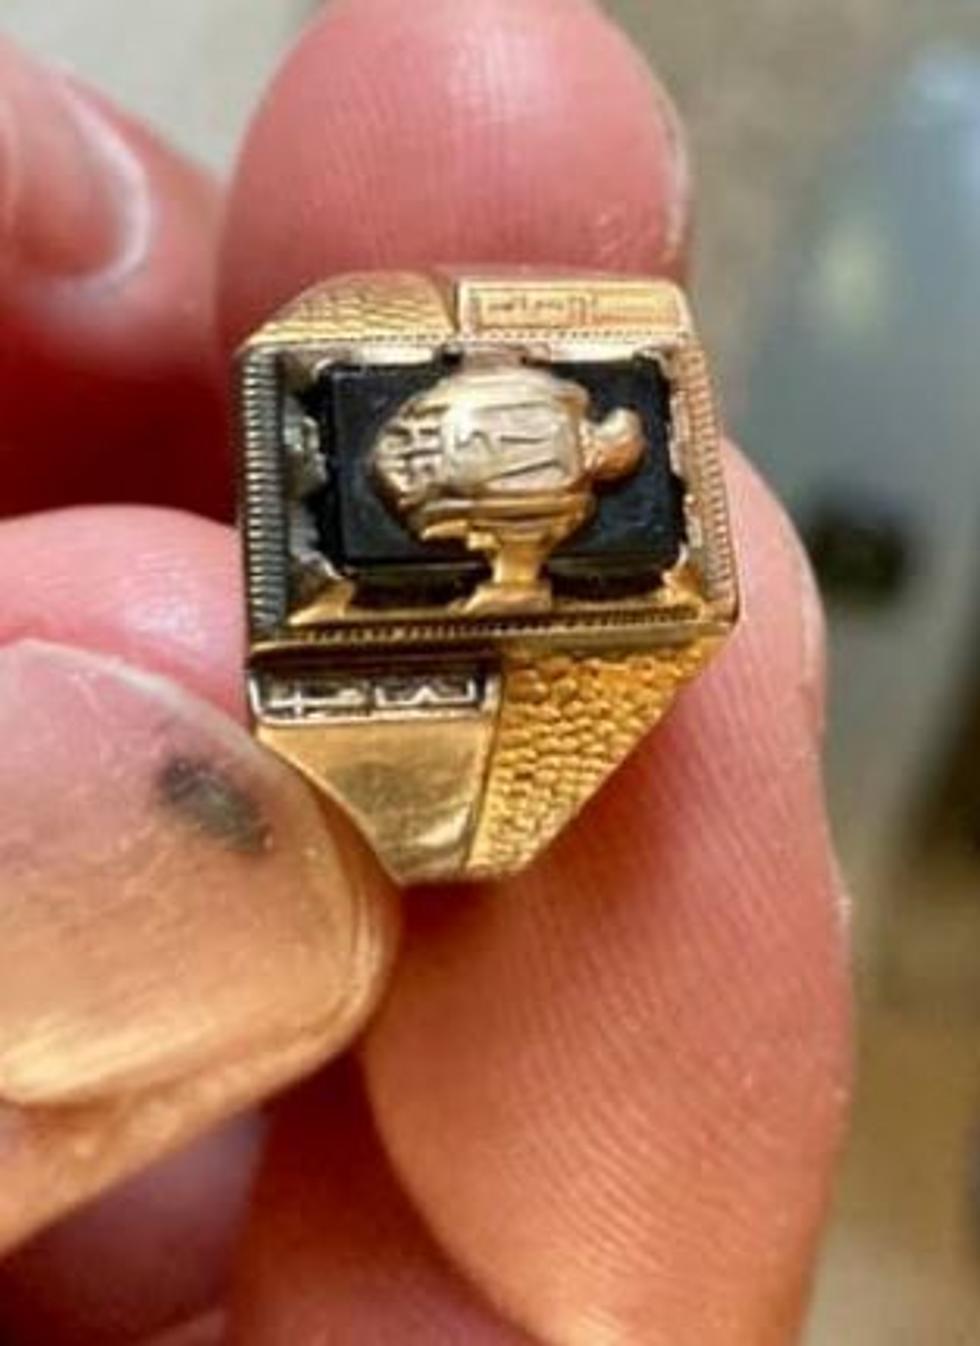 87-Year-Old Class Ring From Ashland Found